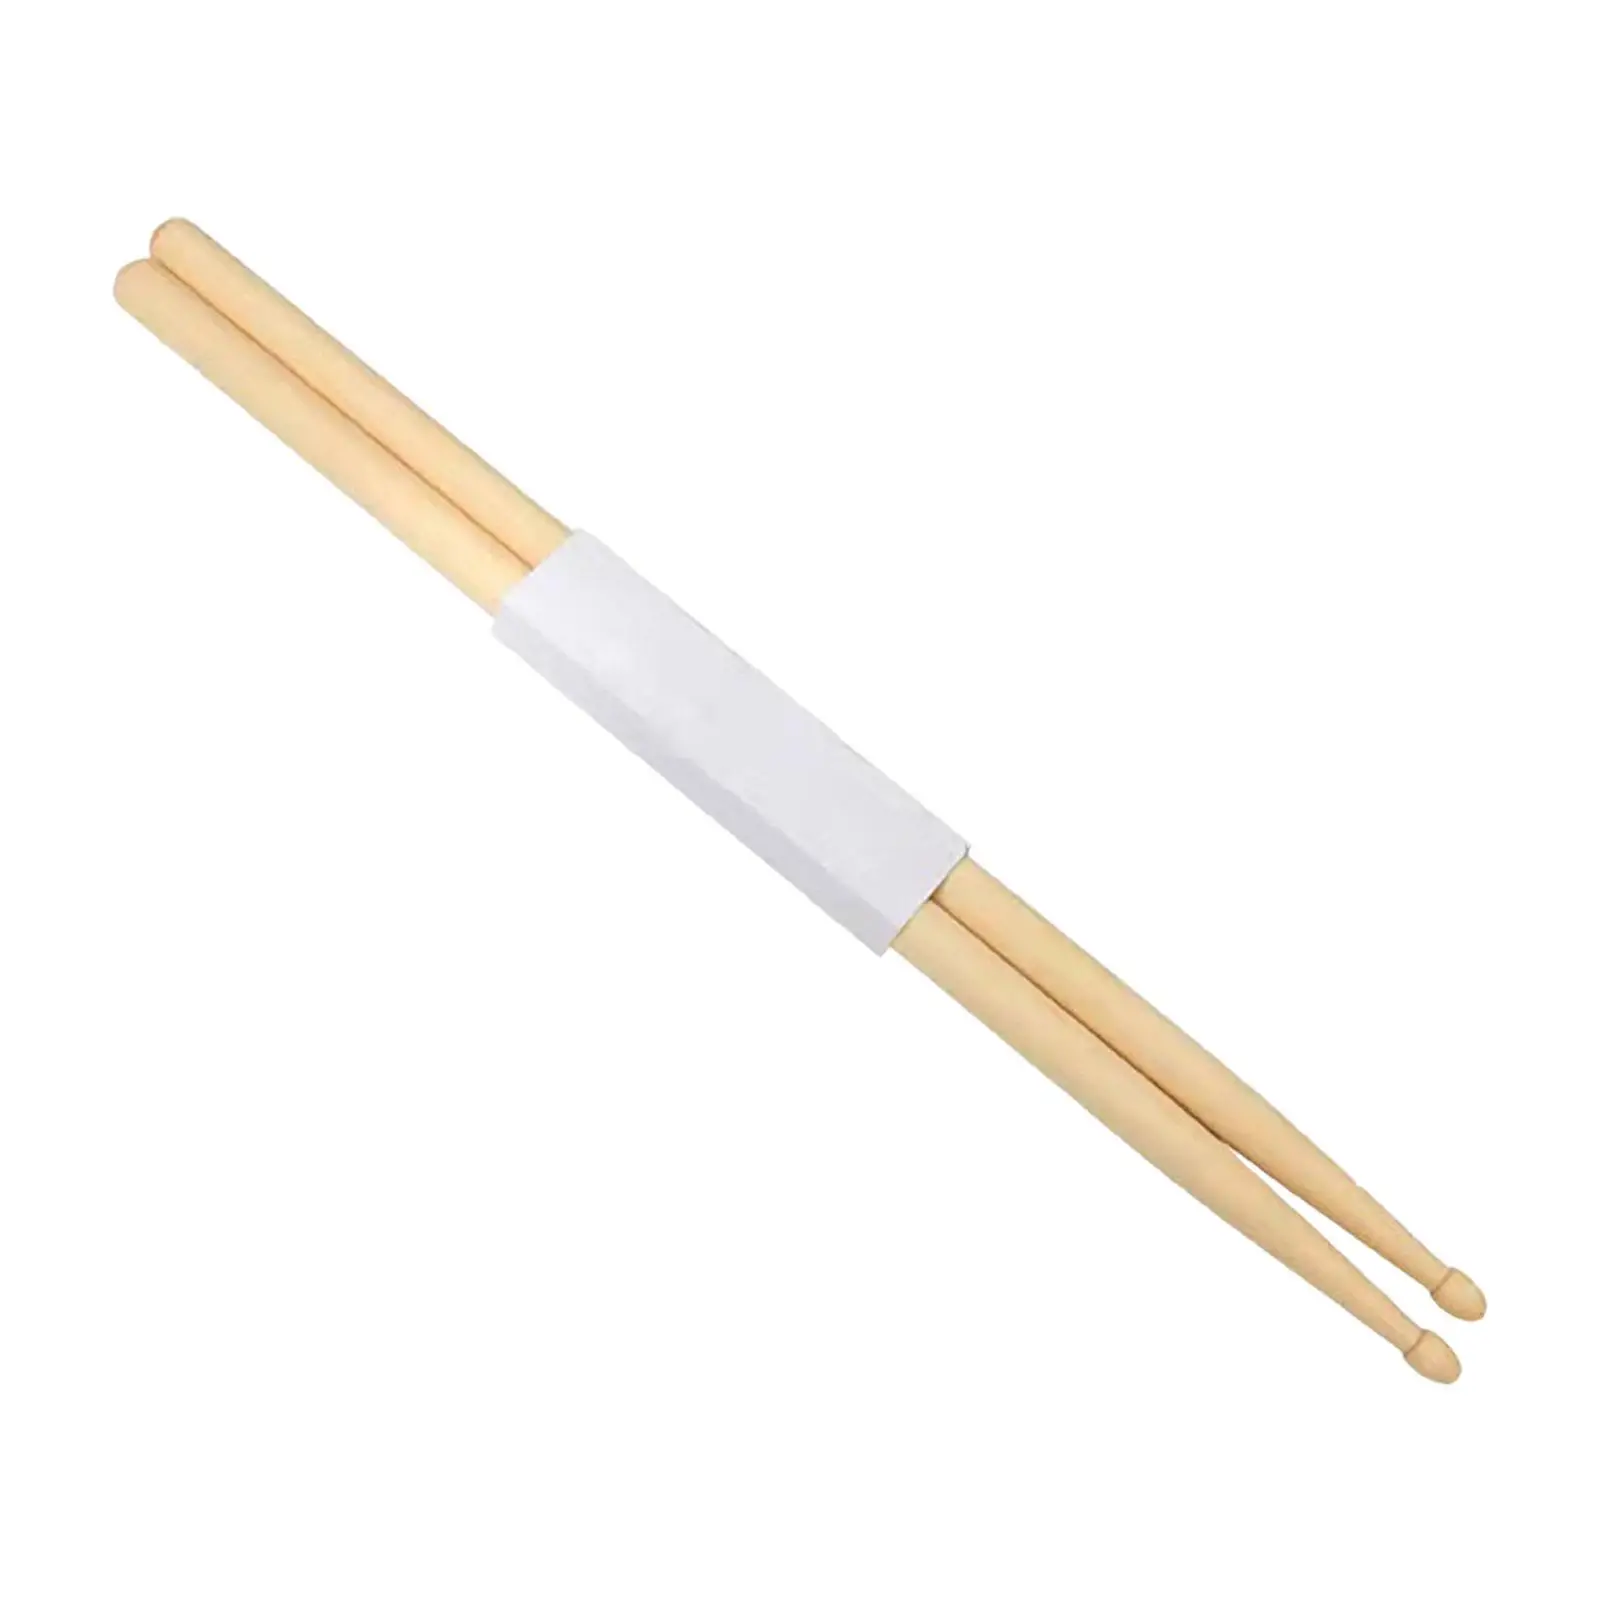 Drum Sticks Drumsticks 5A 7A Maple Wood Drum Sticks for Kids Adults Exercise